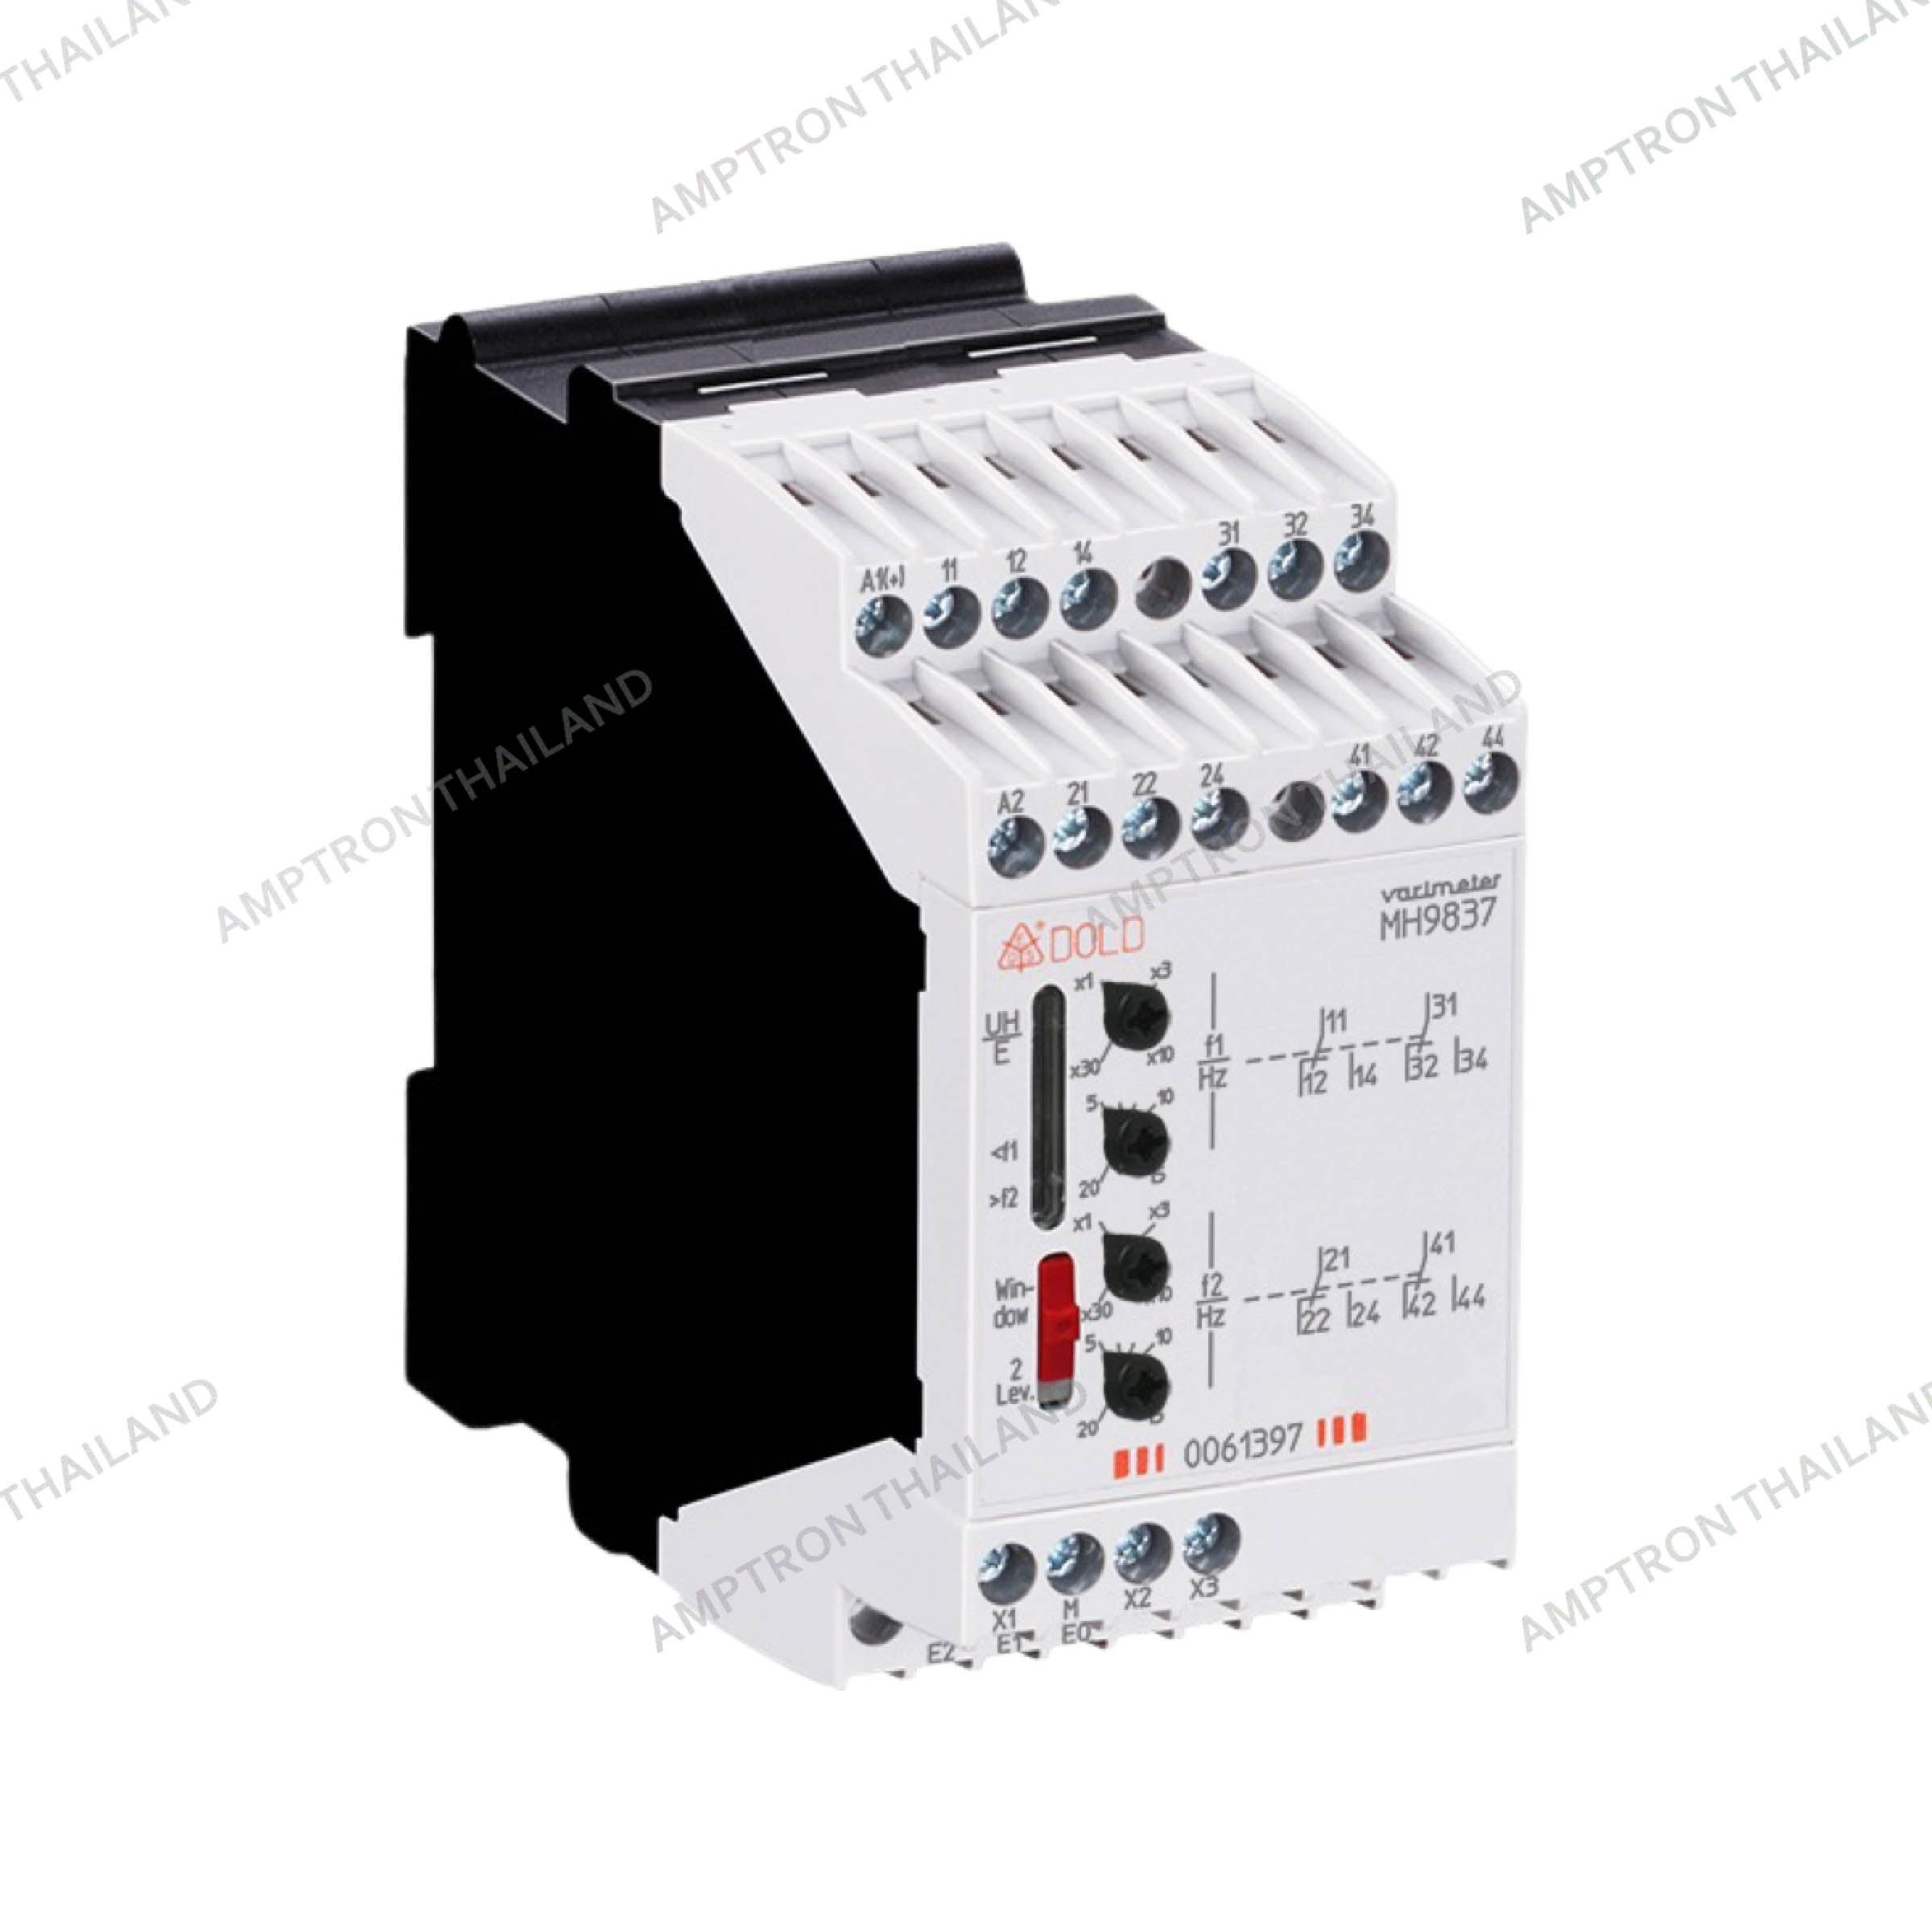 MH 9837 Varimeter Frequency Relay